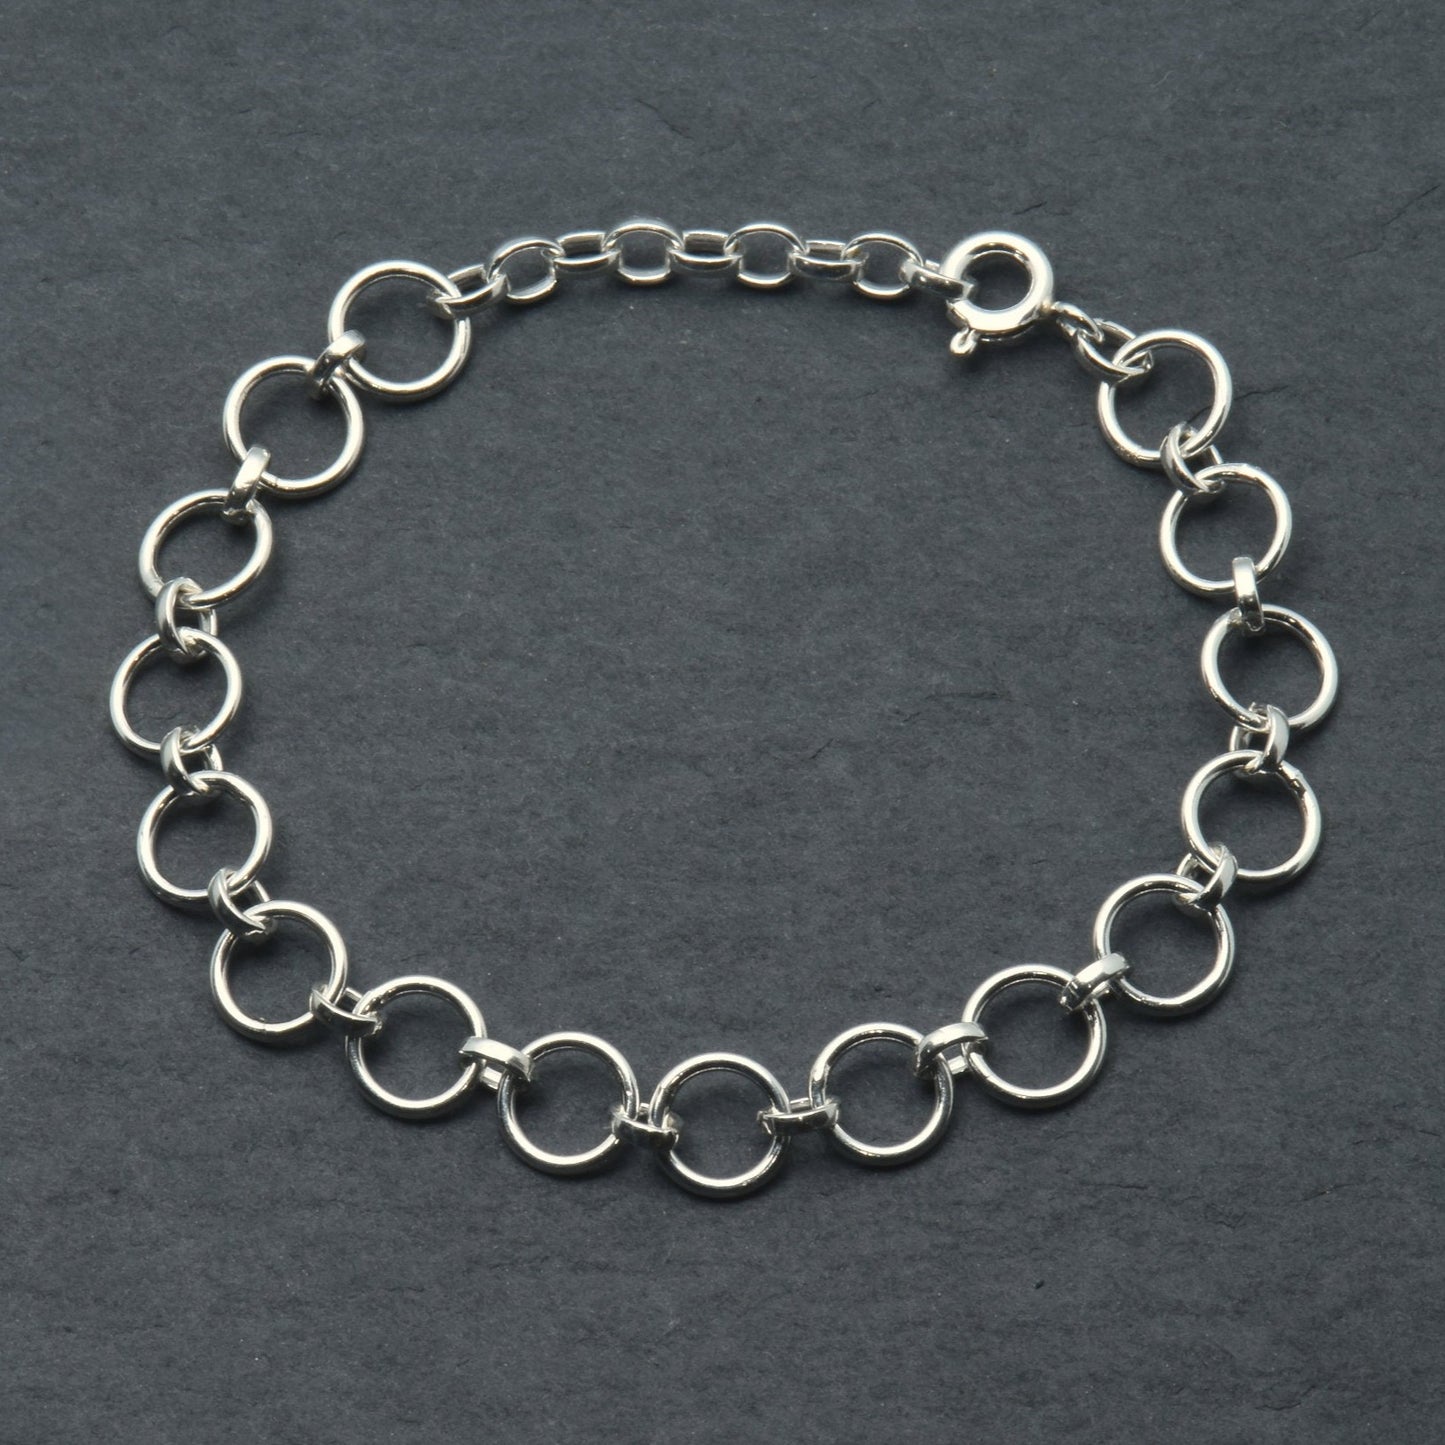 Silver bracelet with circle links on a slate background